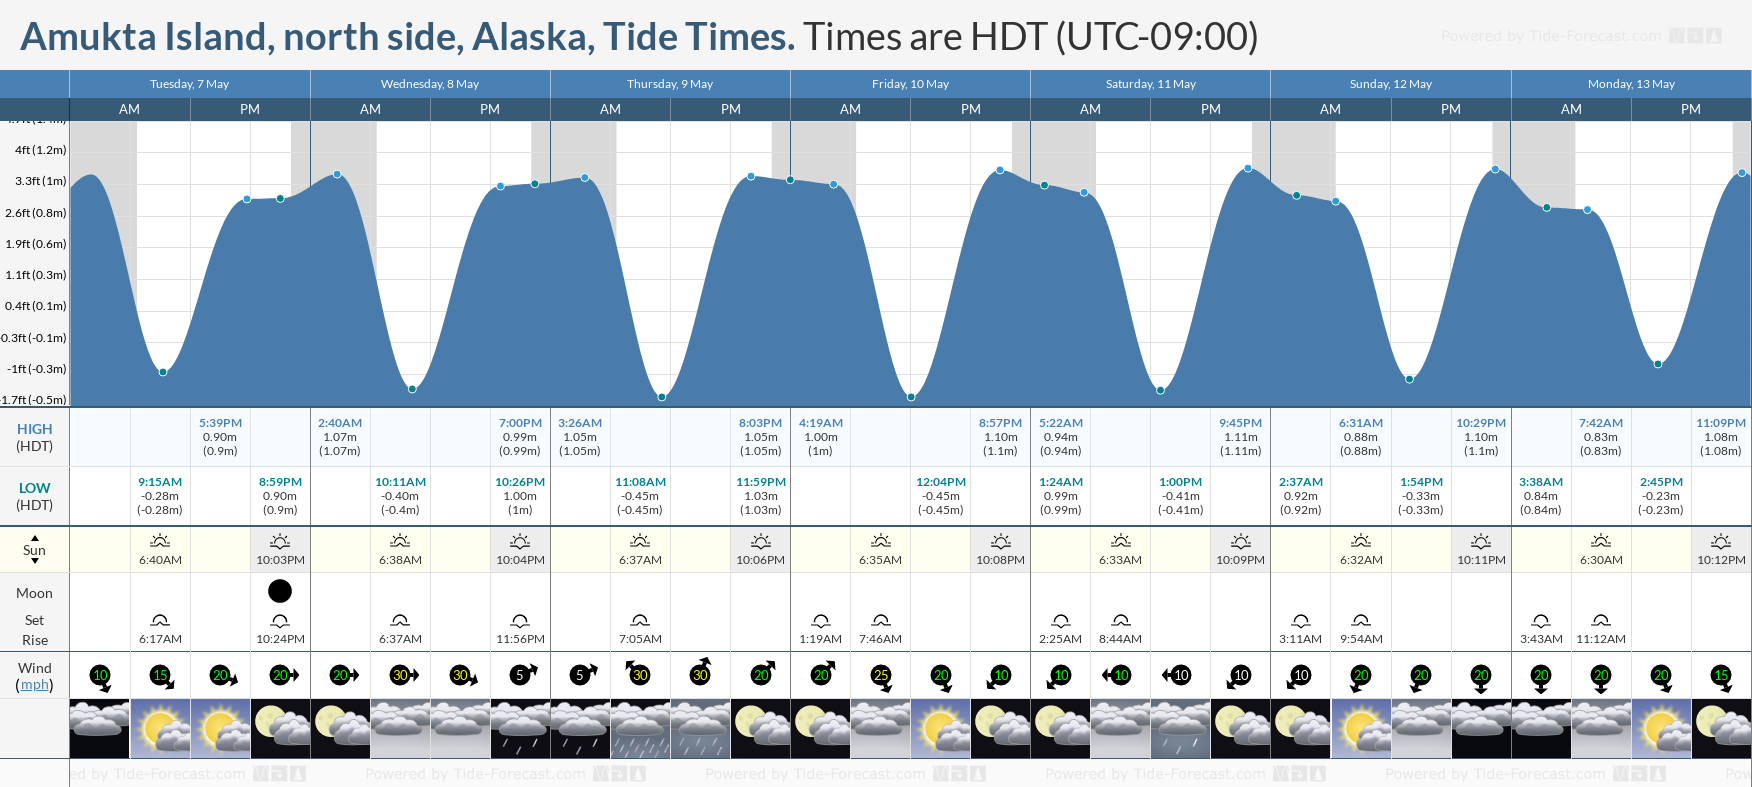 Amukta Island, north side, Alaska Tide Chart including high and low tide tide times for the next 7 days